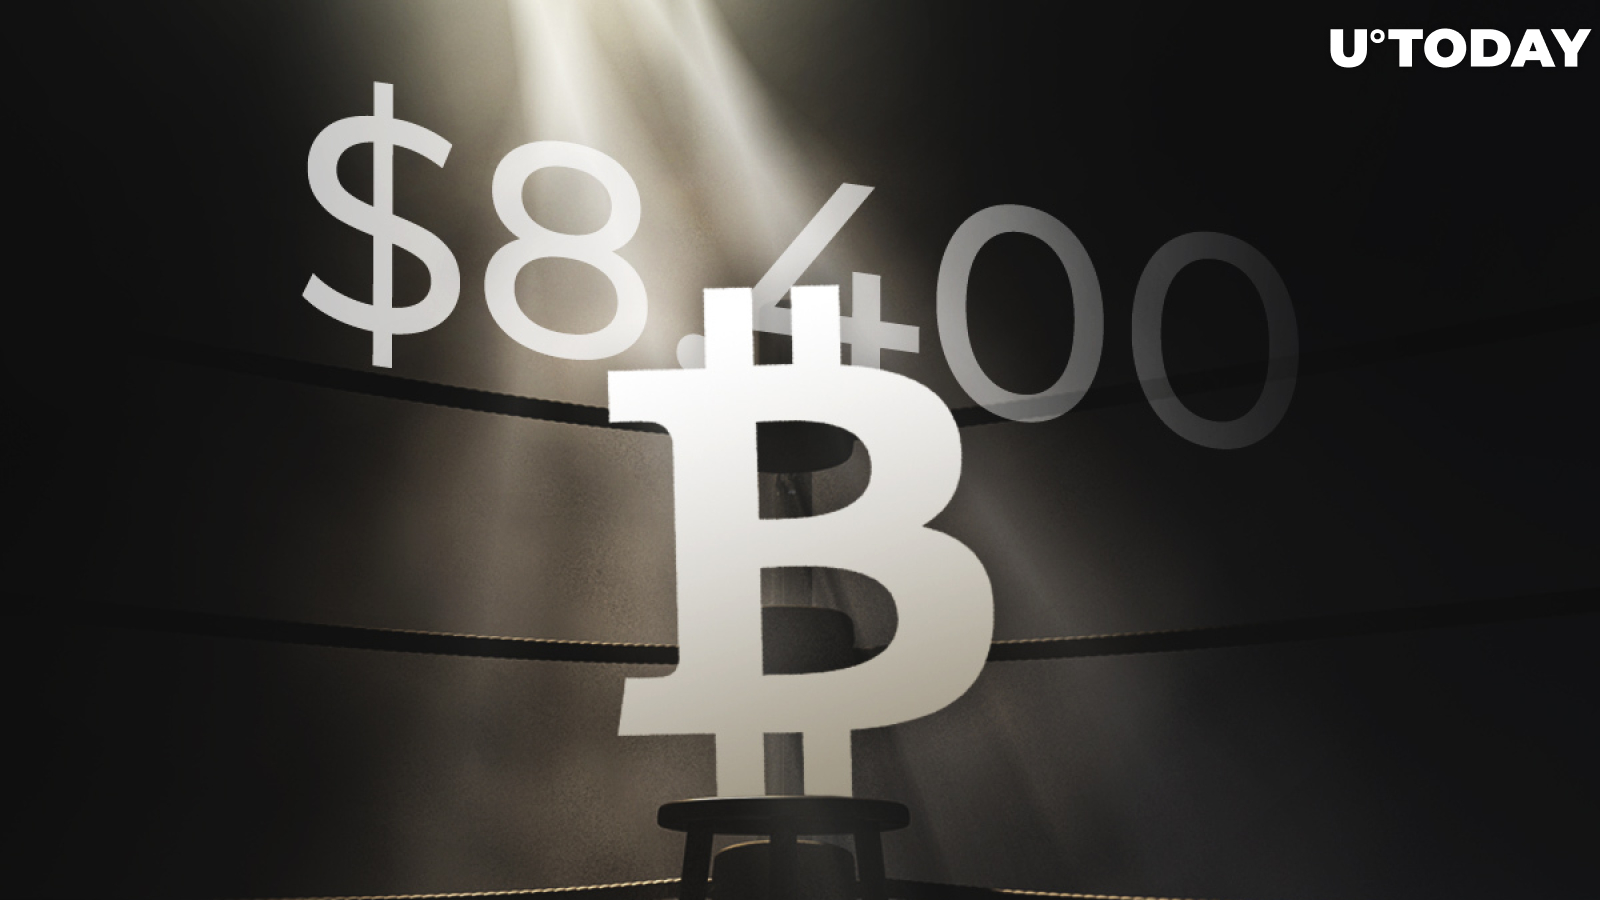 Bitcoin Price Rebounds to $8,400, but This Trader Warns the Bulls Not to Call the Fight Early